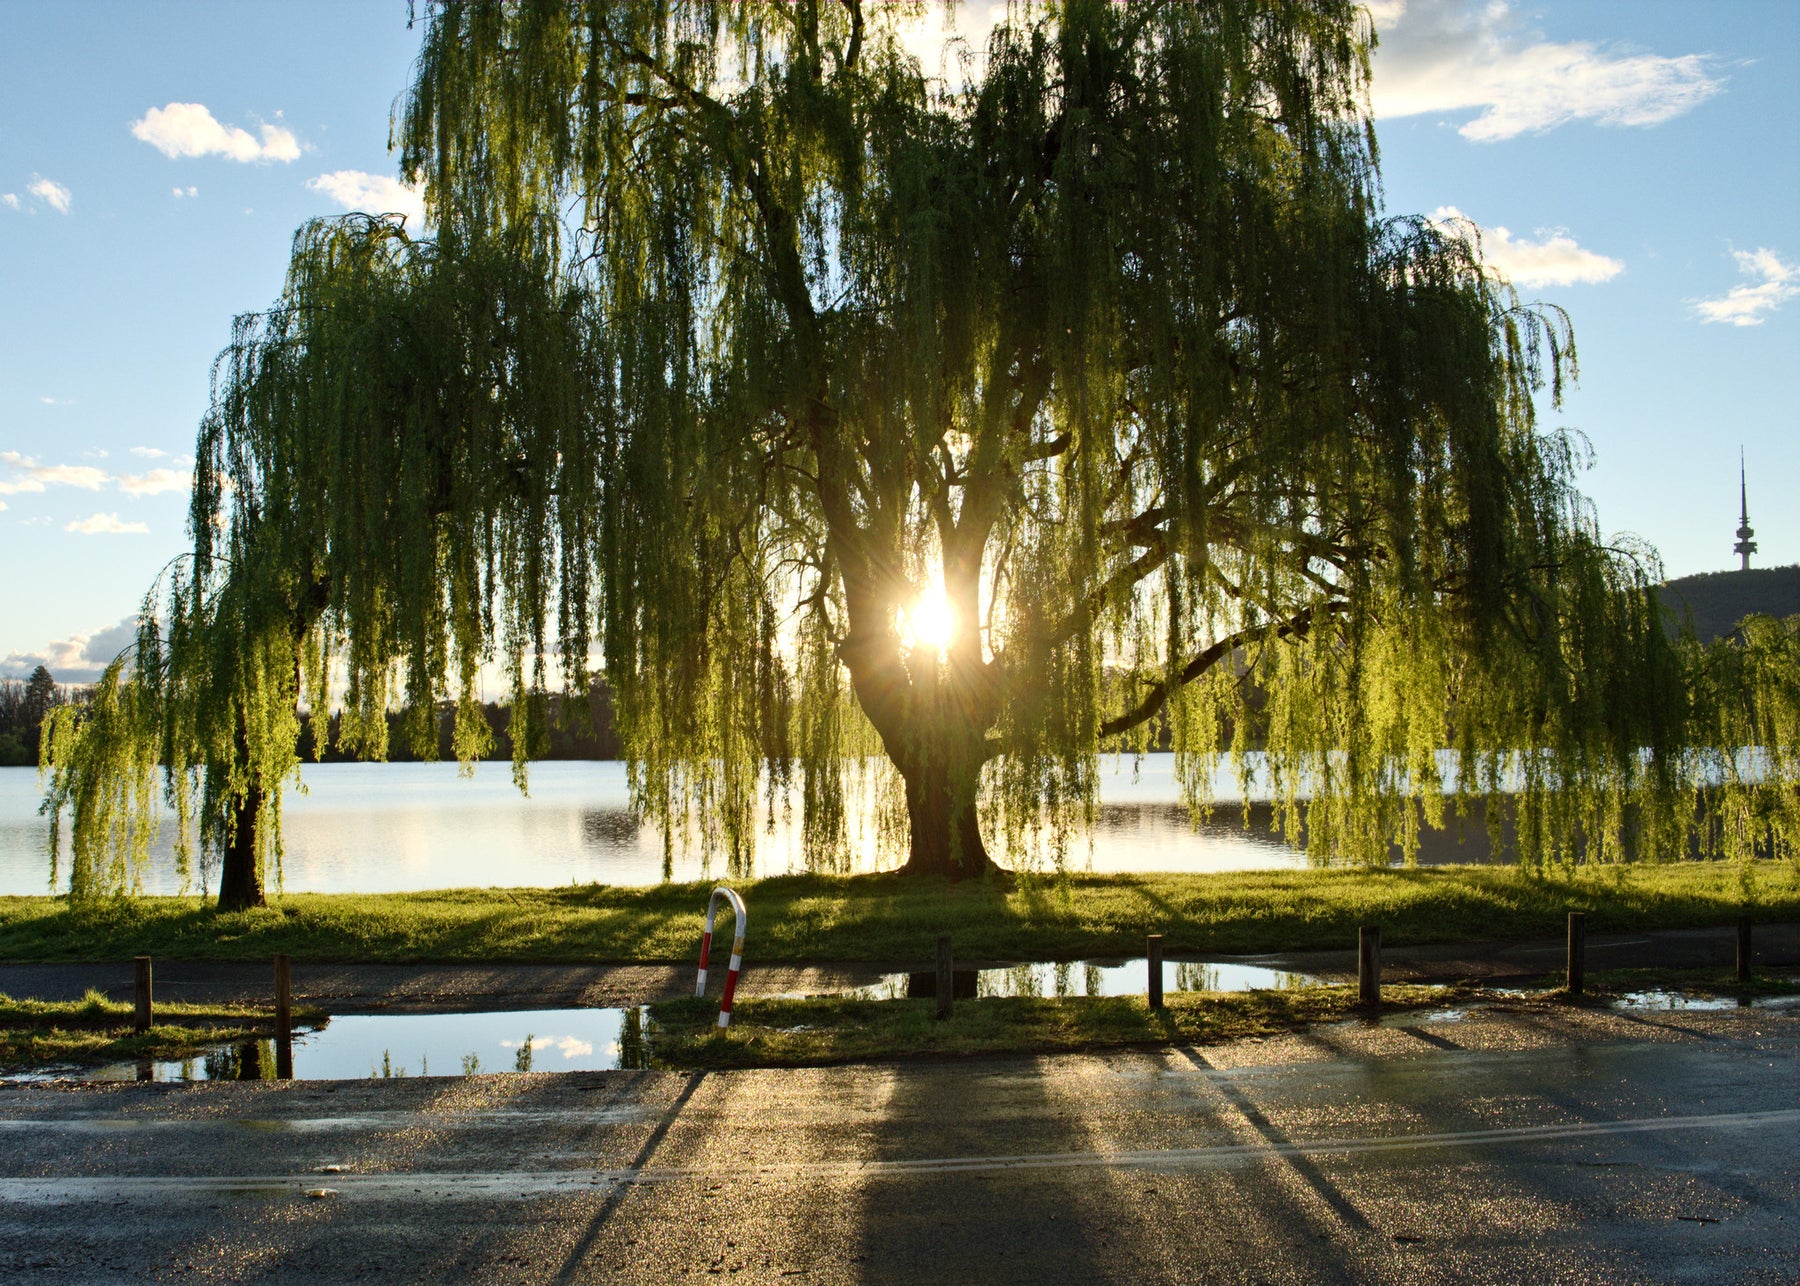 Weeping Willow - Trees of Remembrance!